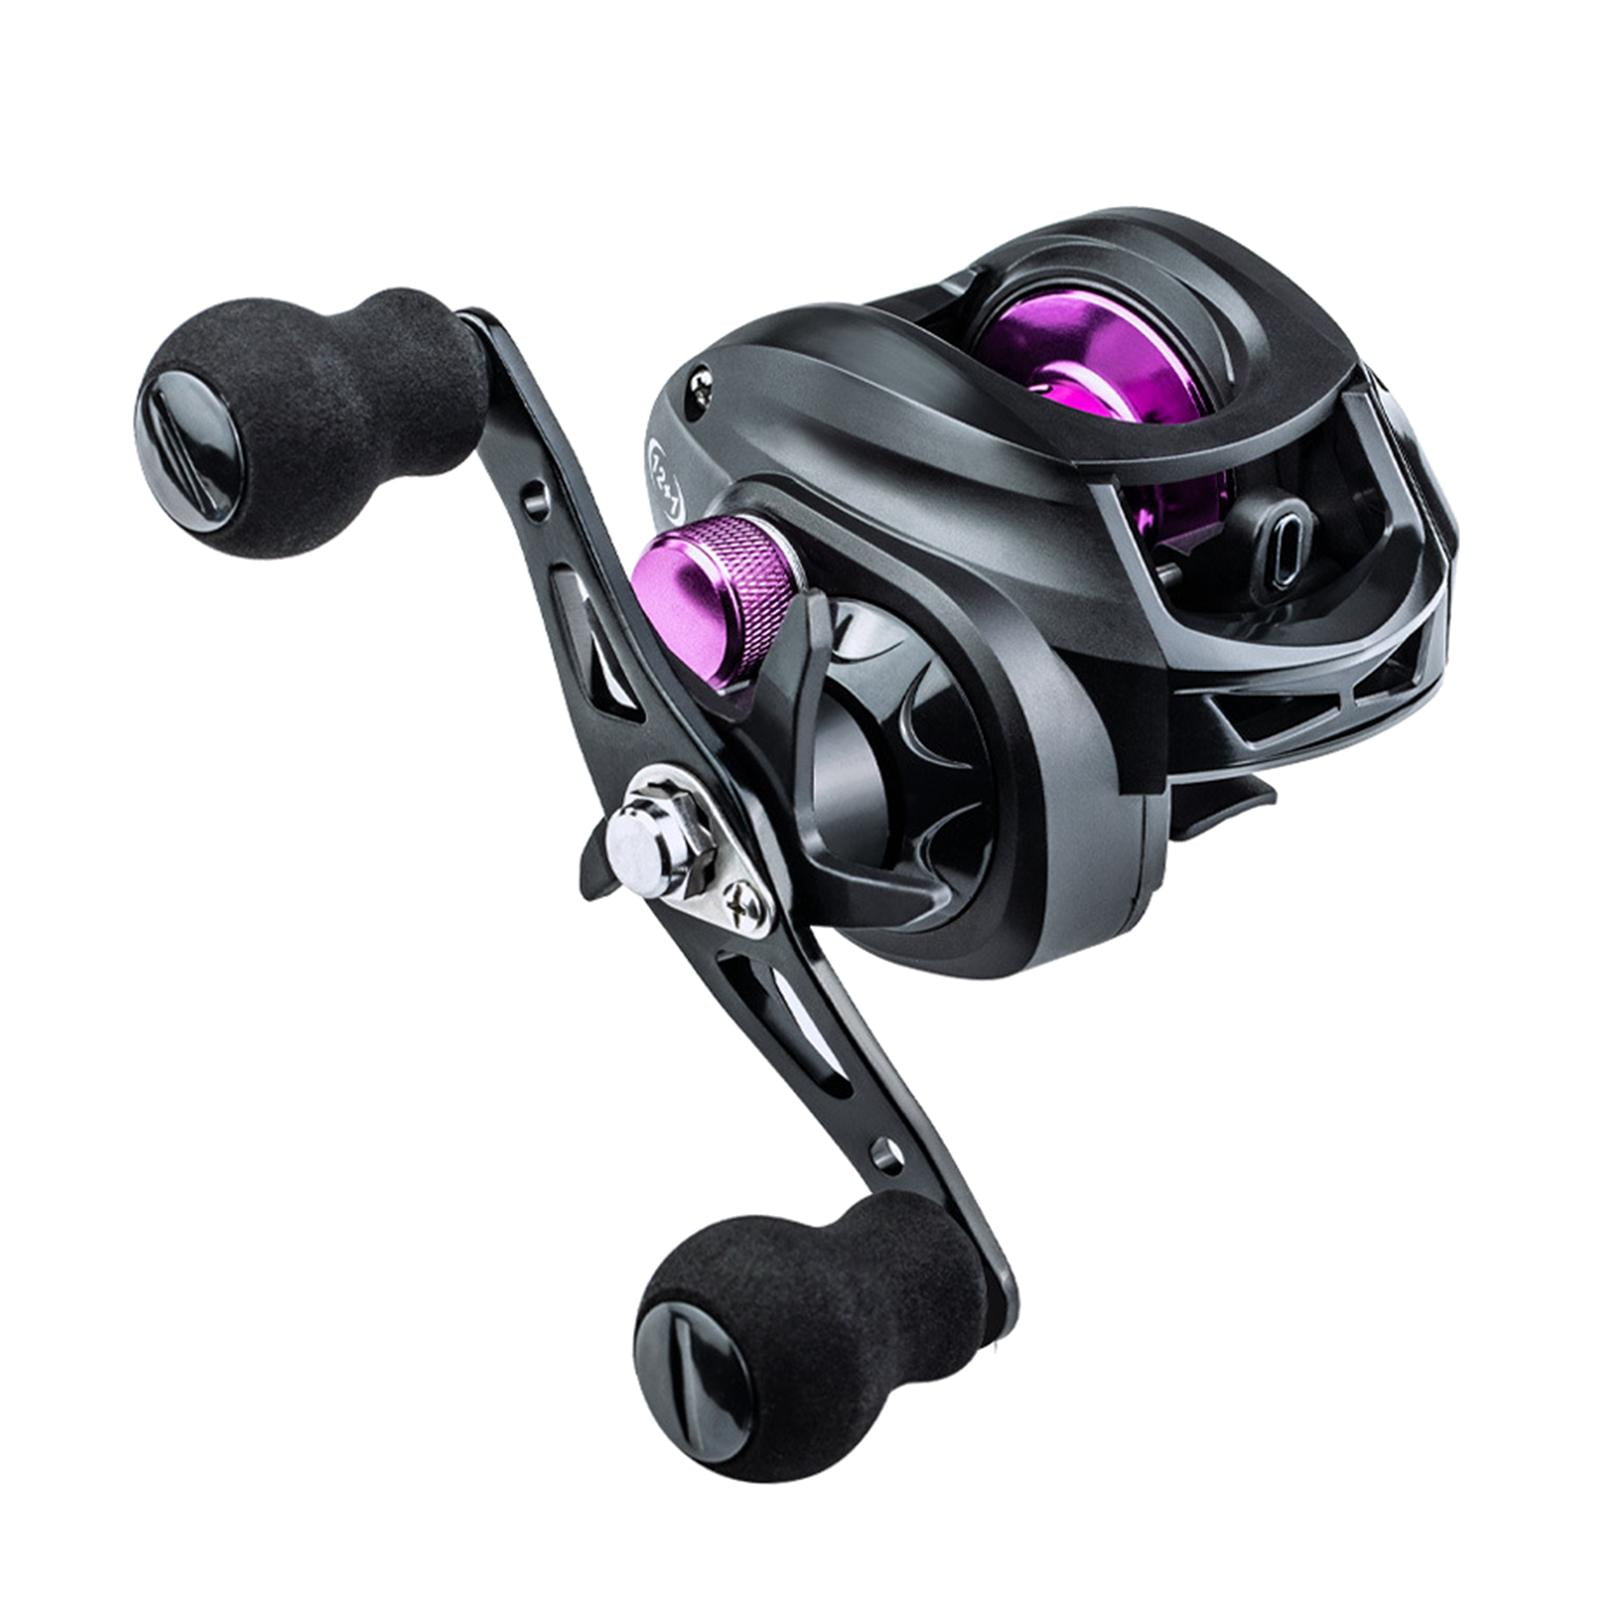 7.2:1 Gear Ratio High- Baitcaster Fishing Reel Reel 12+1 to 8KG Drag 15  Level Brake Saltwater And Freshwater , Right-handed 